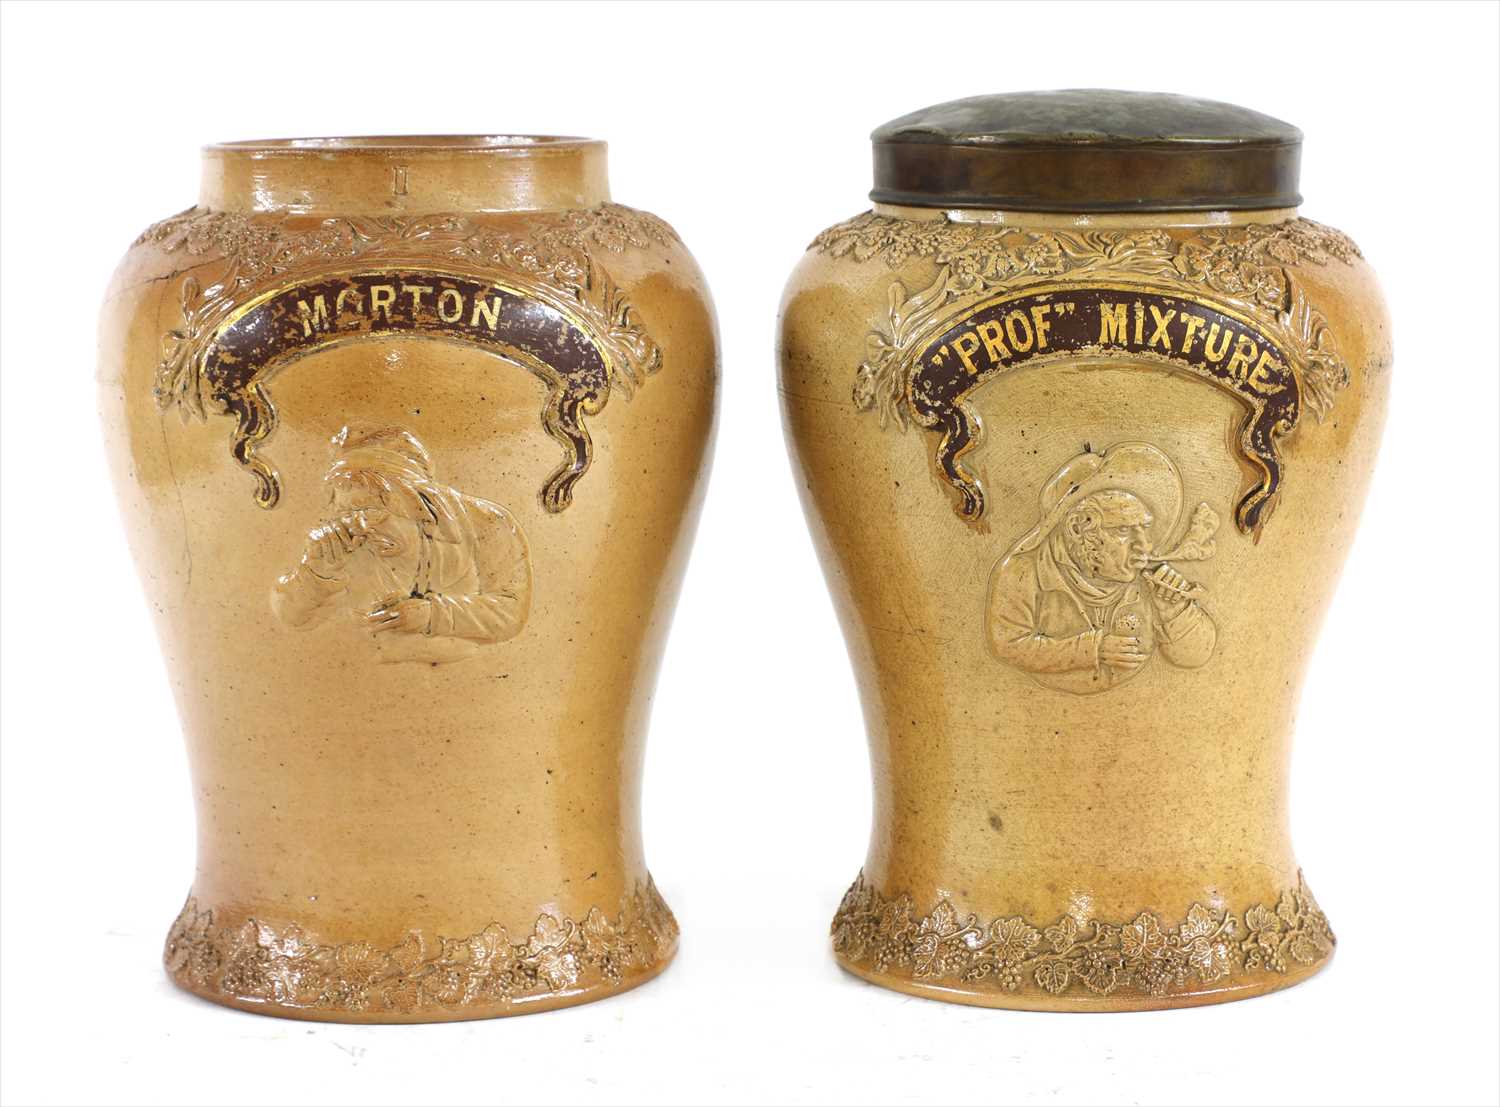 Lot 282 - Early tobacco and snuff jars